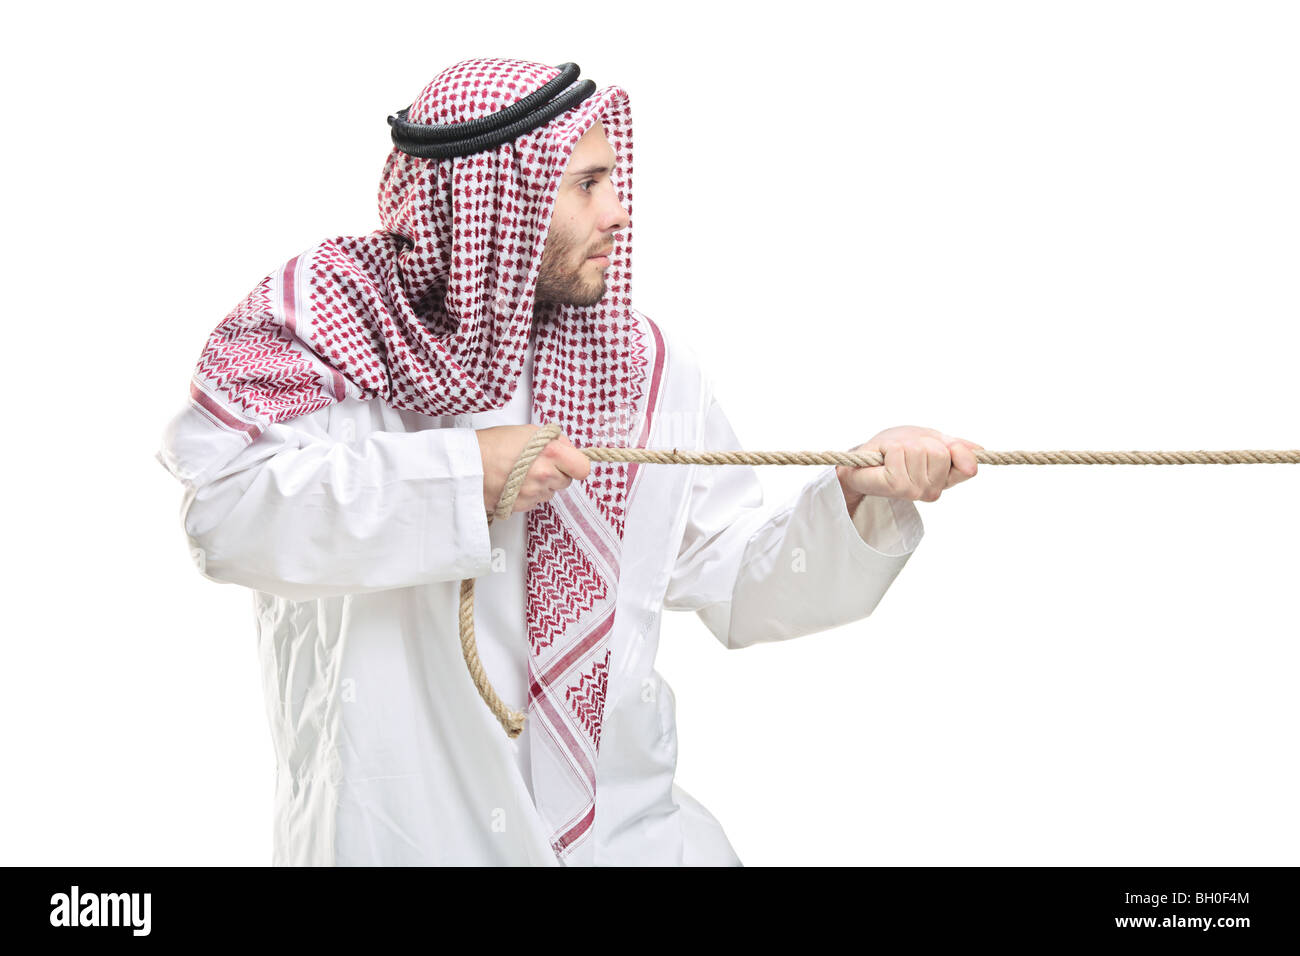 Arab person pulling a rope,isolated on white background Stock Photo